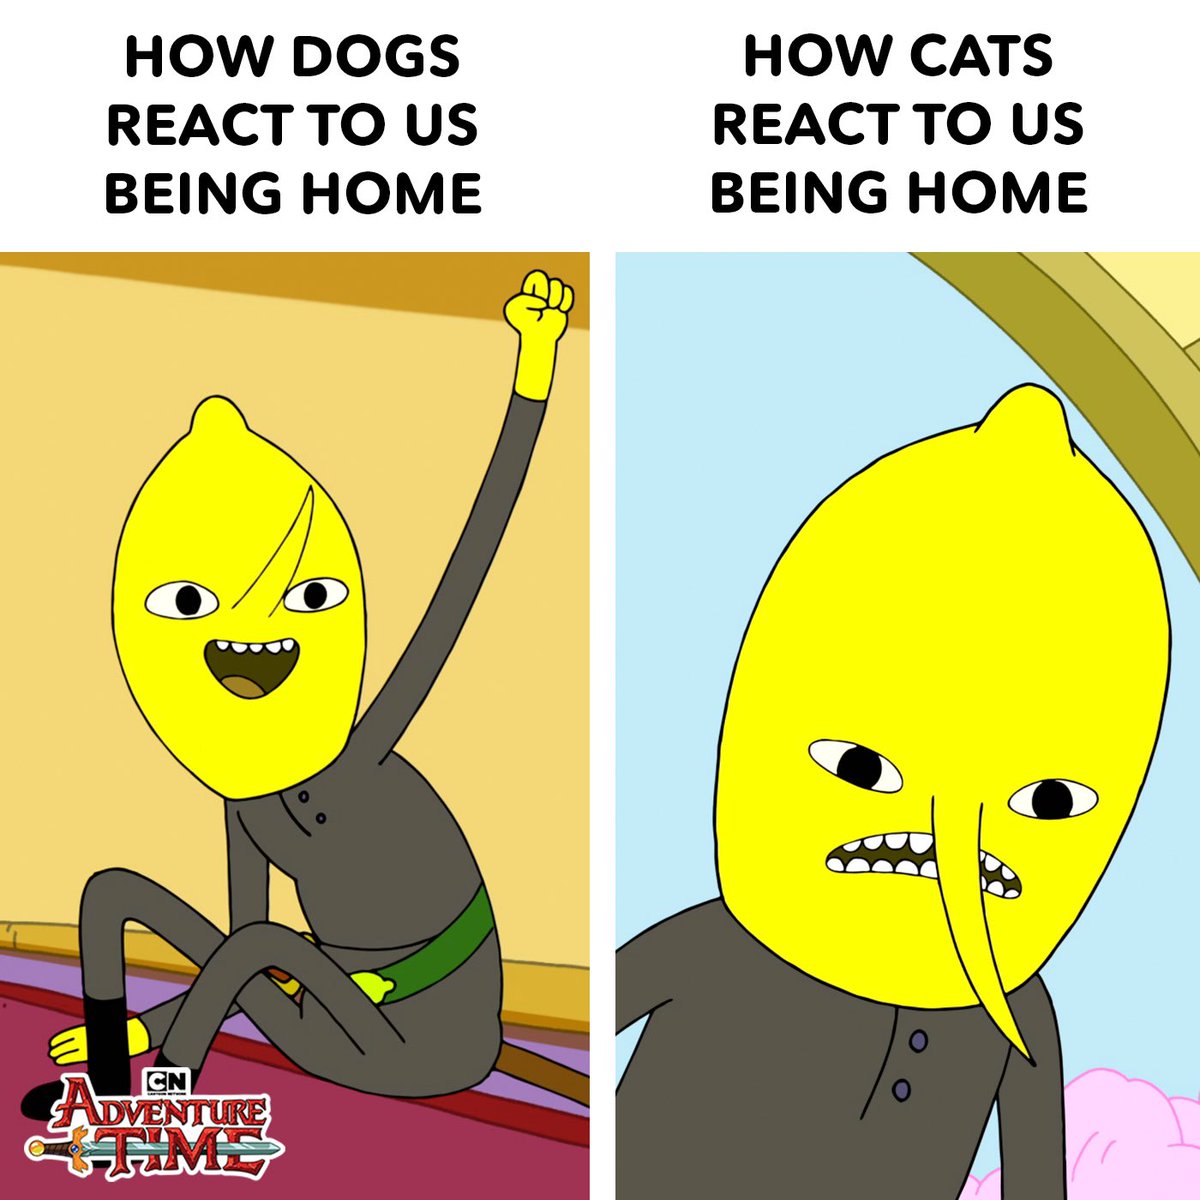 Dogs: Living their best lives
Cats: THIS CASTLE IS IN UNACCEPTABLE CONDITION!!! 😖😫

#NationalPetsDay #cartoonnetwork #CNCheckIN #adventuretime #lemongrab